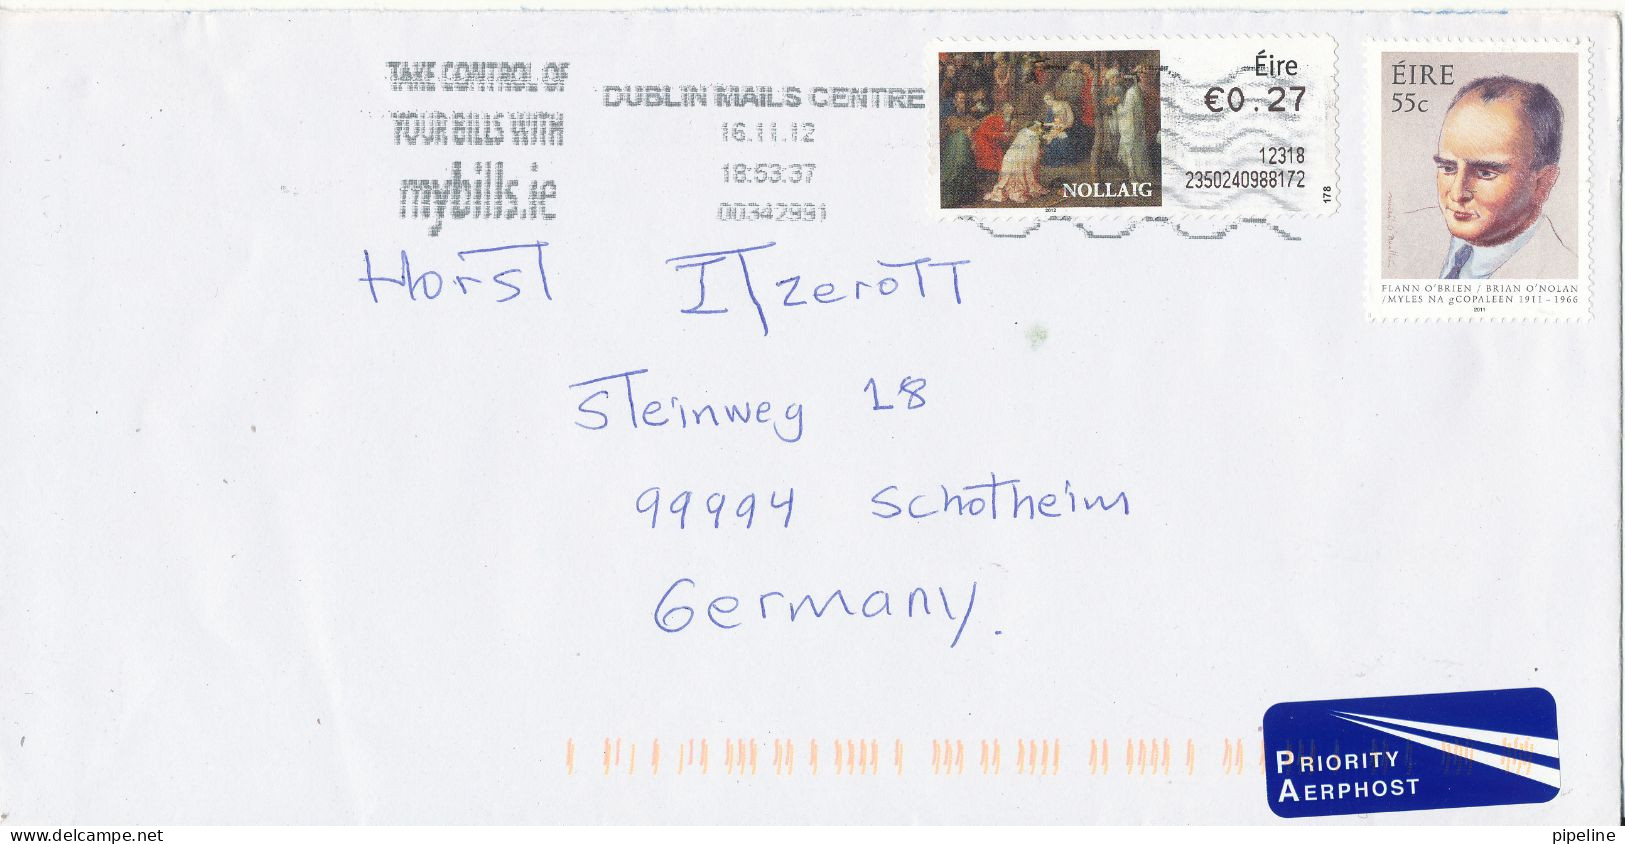 Ireland Cover Sent To Germany 16-11-2012 Topic Stamps - Briefe U. Dokumente